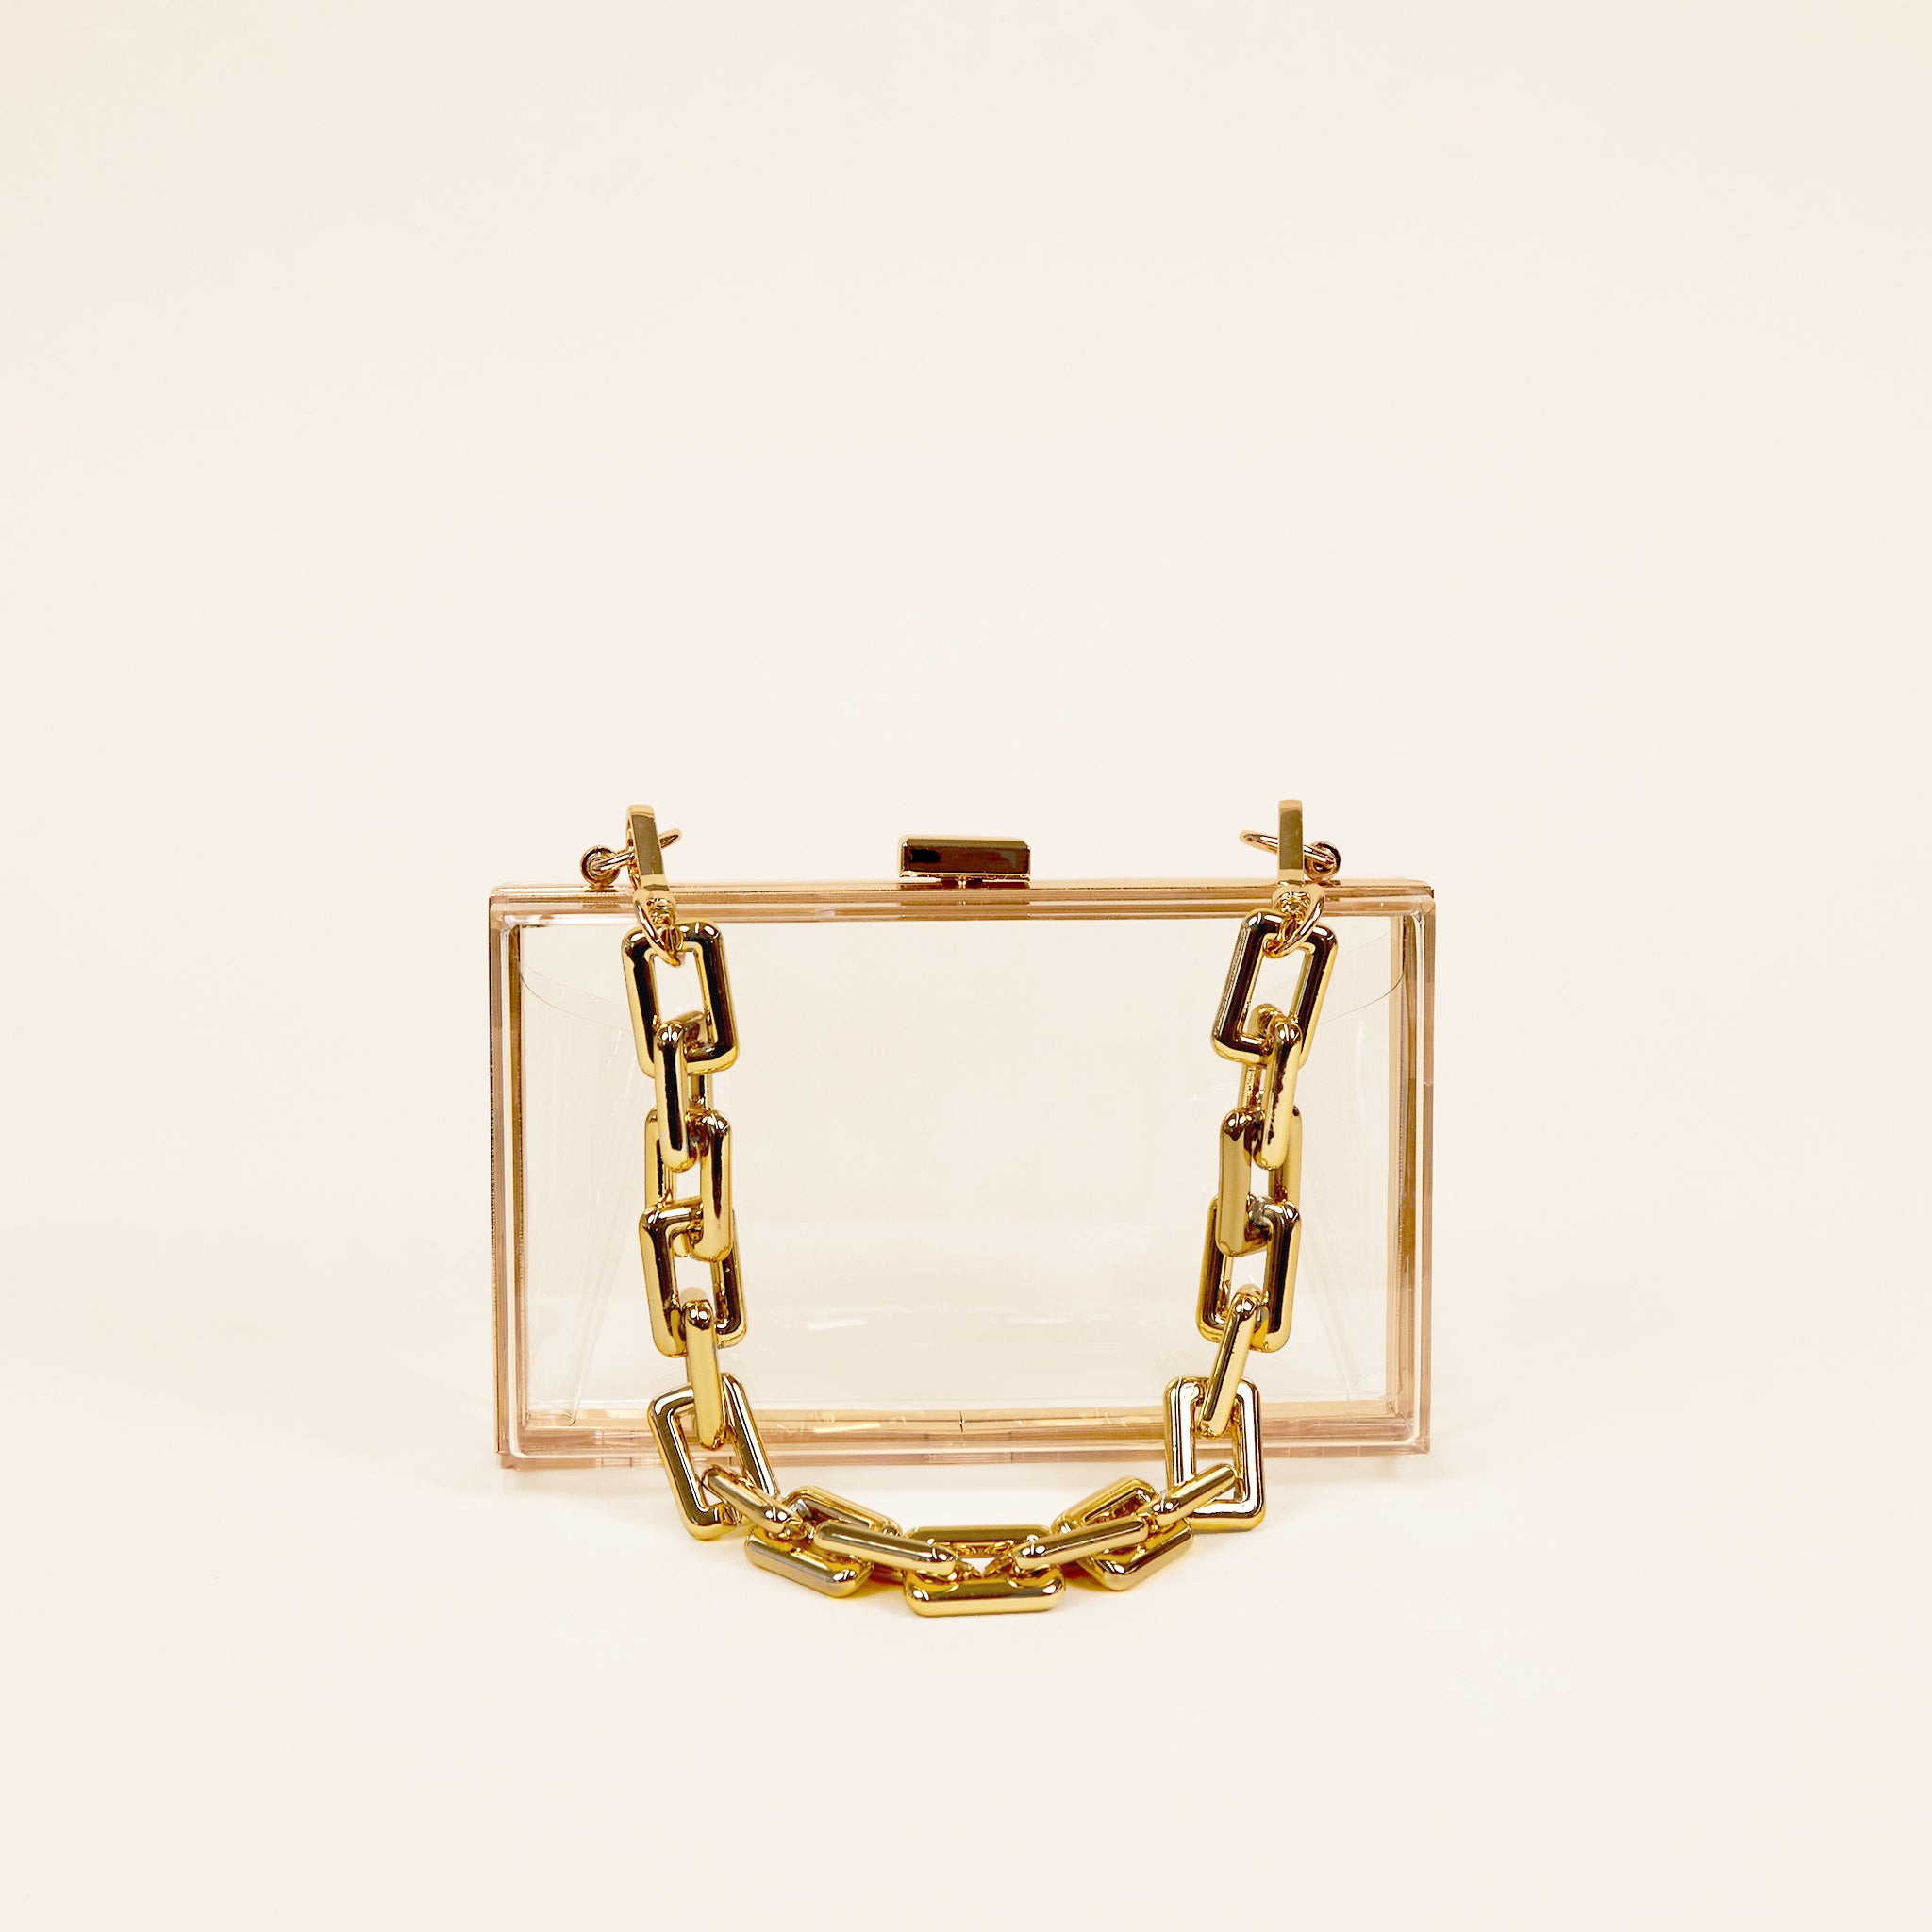 Chunky Detachable Gold Chain Pouch Clutch Bag